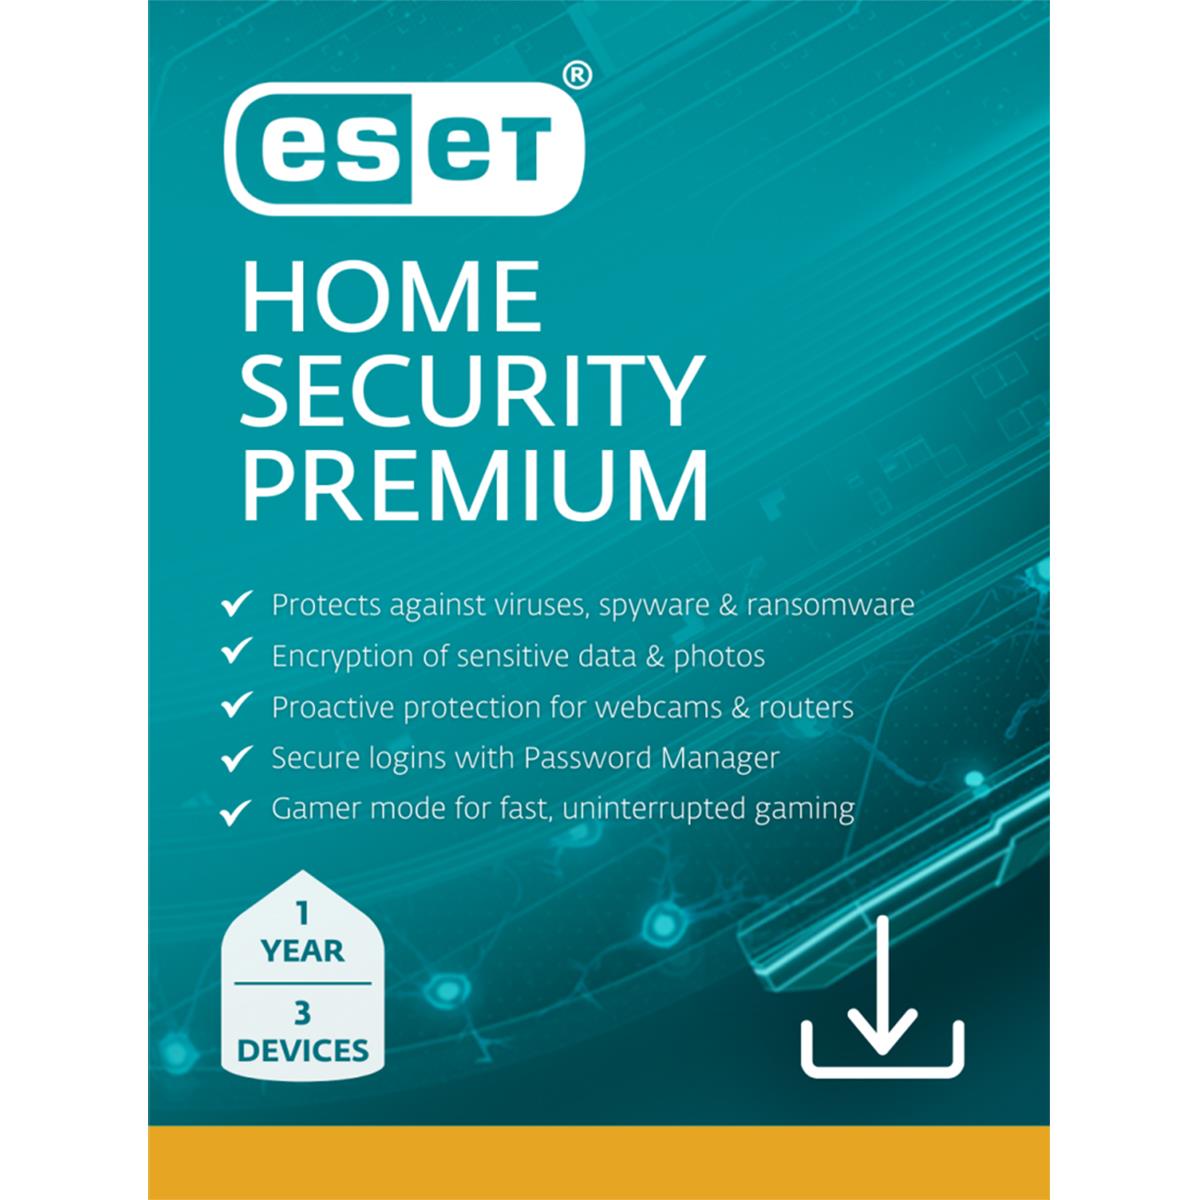 Image of ESET Premium 1 Year Home Security 3 Device